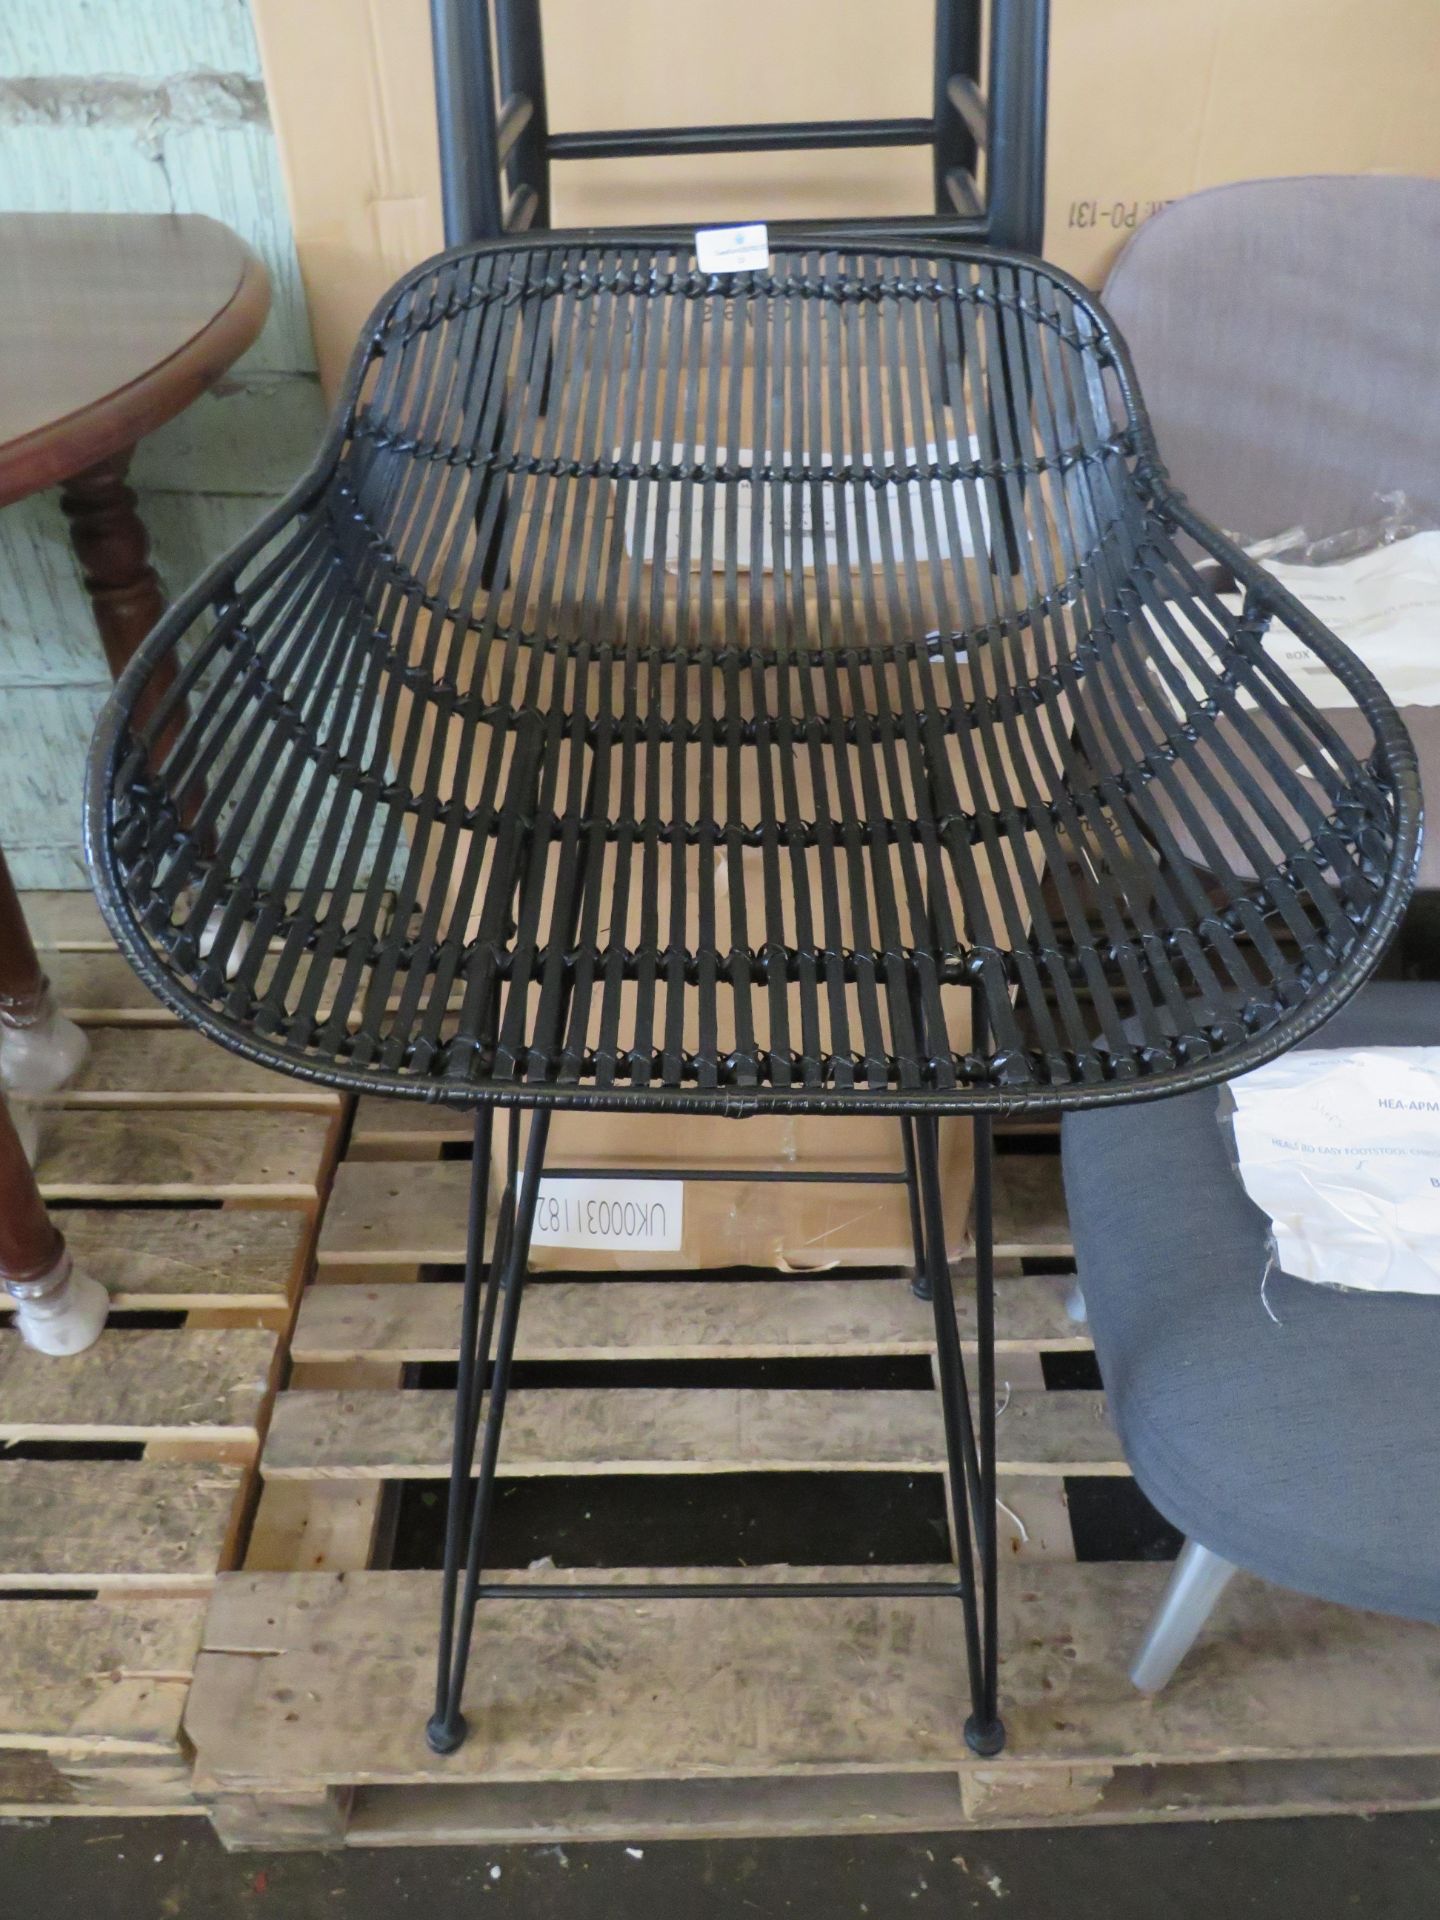 Cox & Cox Flat Rattan Counter Stool Black RRP 350.00Grade BC: Product is preloved or well-